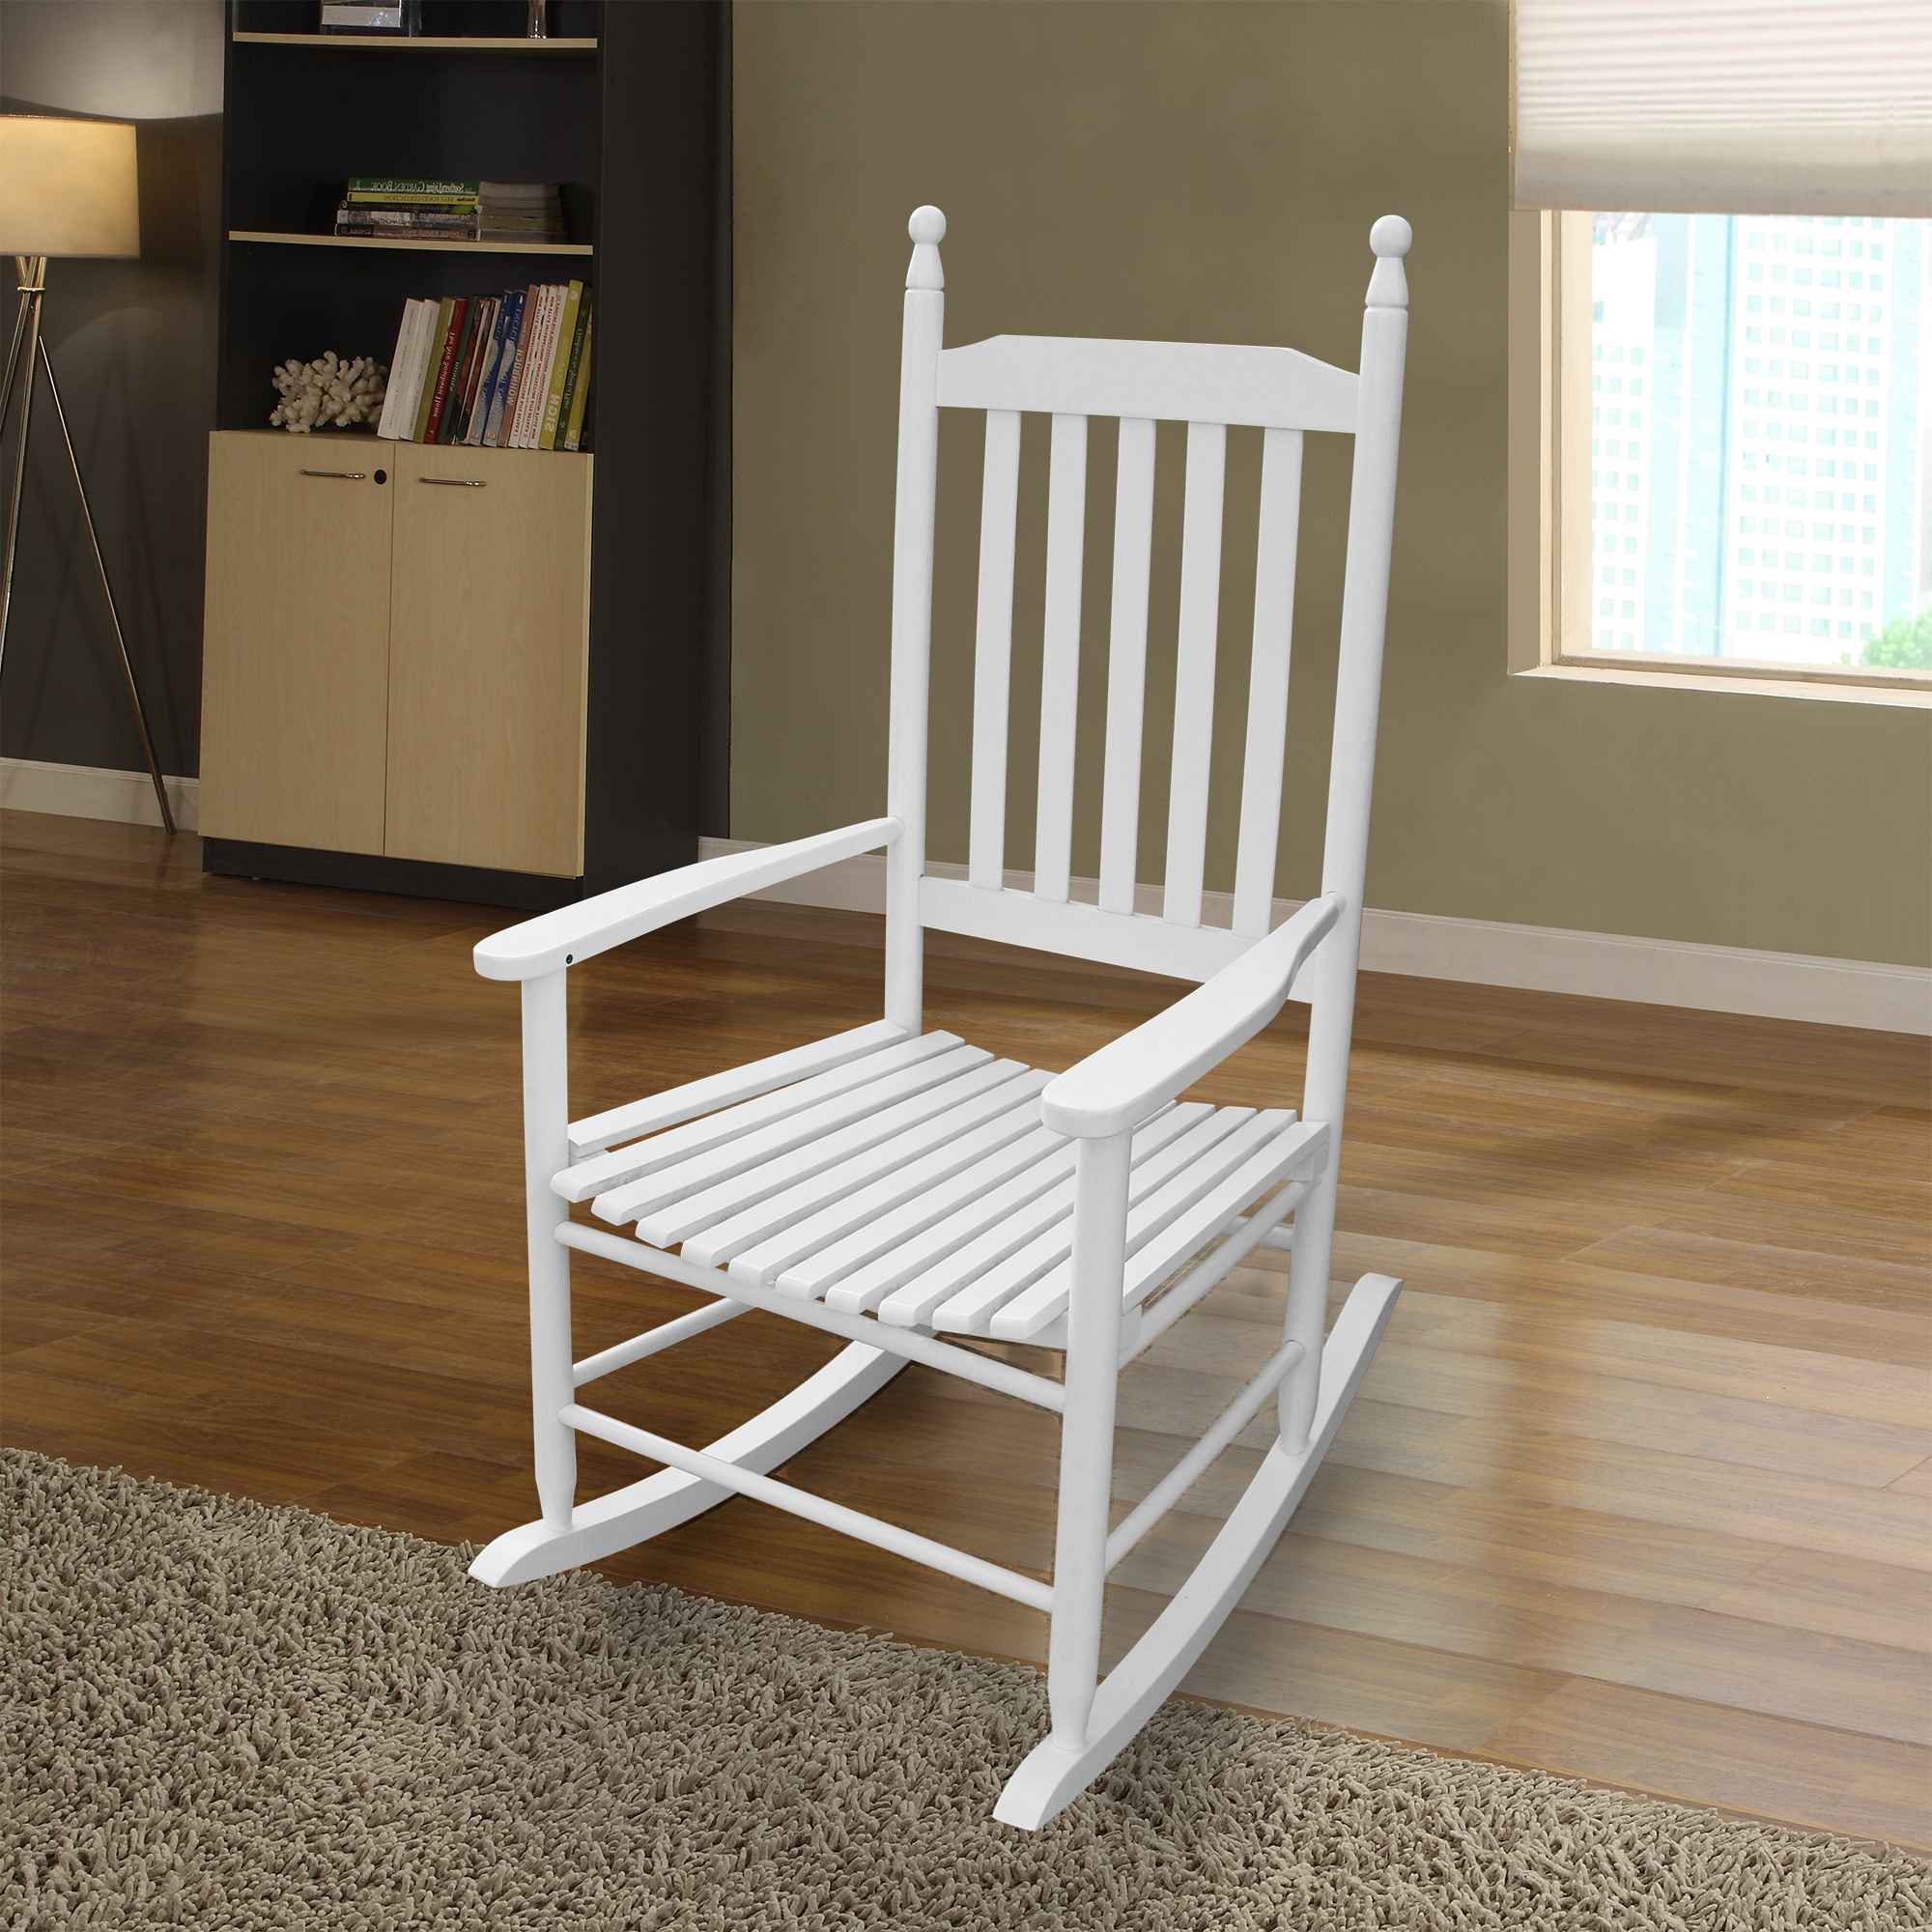 Outdoor Rocking Chair, Wood Rocker Chair for Porch Garden Patio, White24.5" L x 32.85" W x 45.3" H - image 1 of 7